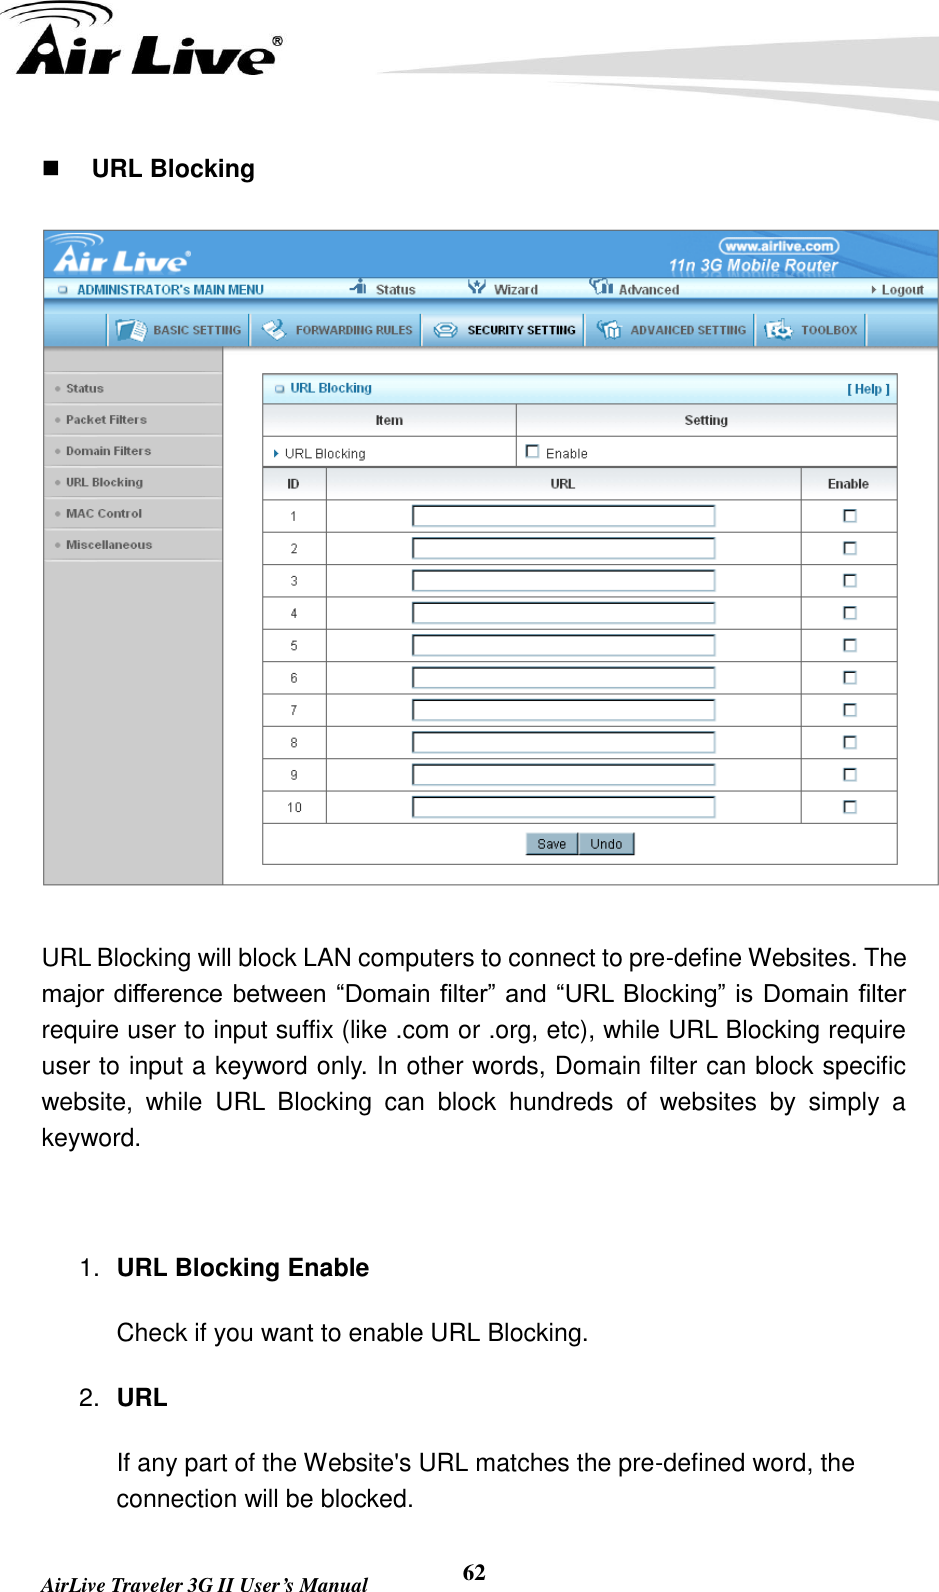   AirLive Traveler 3G II User’s Manual 62  URL Blocking  URL Blocking will block LAN computers to connect to pre-define Websites. The major difference between “Domain filter” and “URL Blocking” is Domain filter require user to input suffix (like .com or .org, etc), while URL Blocking require user to input a keyword only. In other words, Domain filter can block specific website,  while  URL  Blocking  can  block  hundreds  of  websites  by  simply  a keyword.  1. URL Blocking Enable Check if you want to enable URL Blocking.   2. URL If any part of the Website&apos;s URL matches the pre-defined word, the connection will be blocked. 